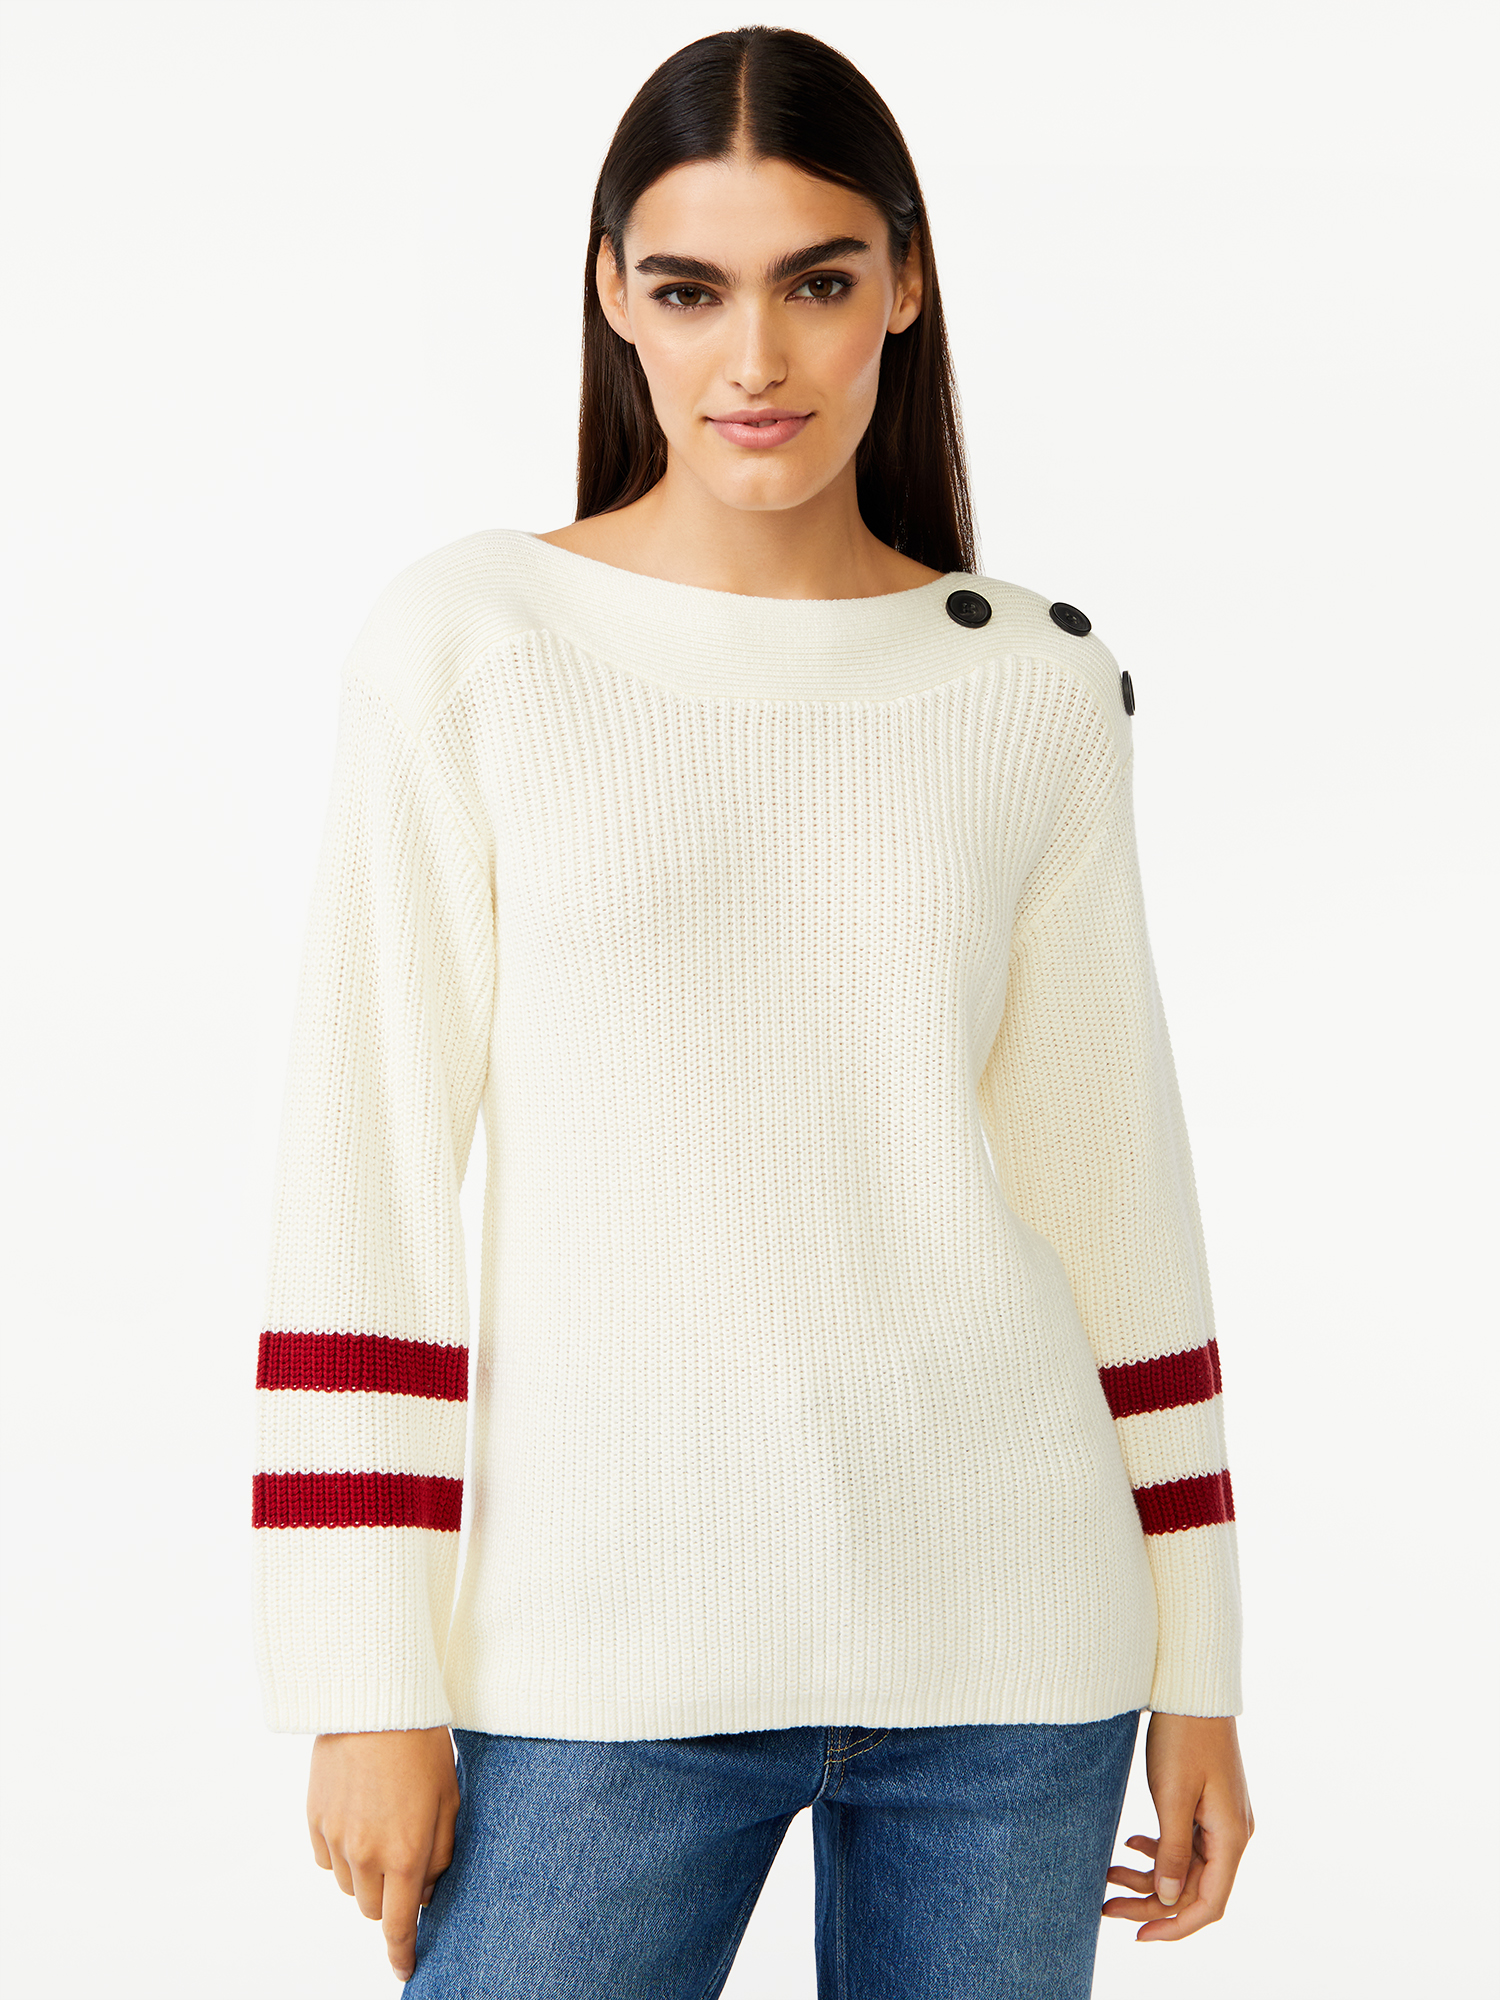 Free Assembly Women’s Button Shoulder Sweater - image 1 of 6